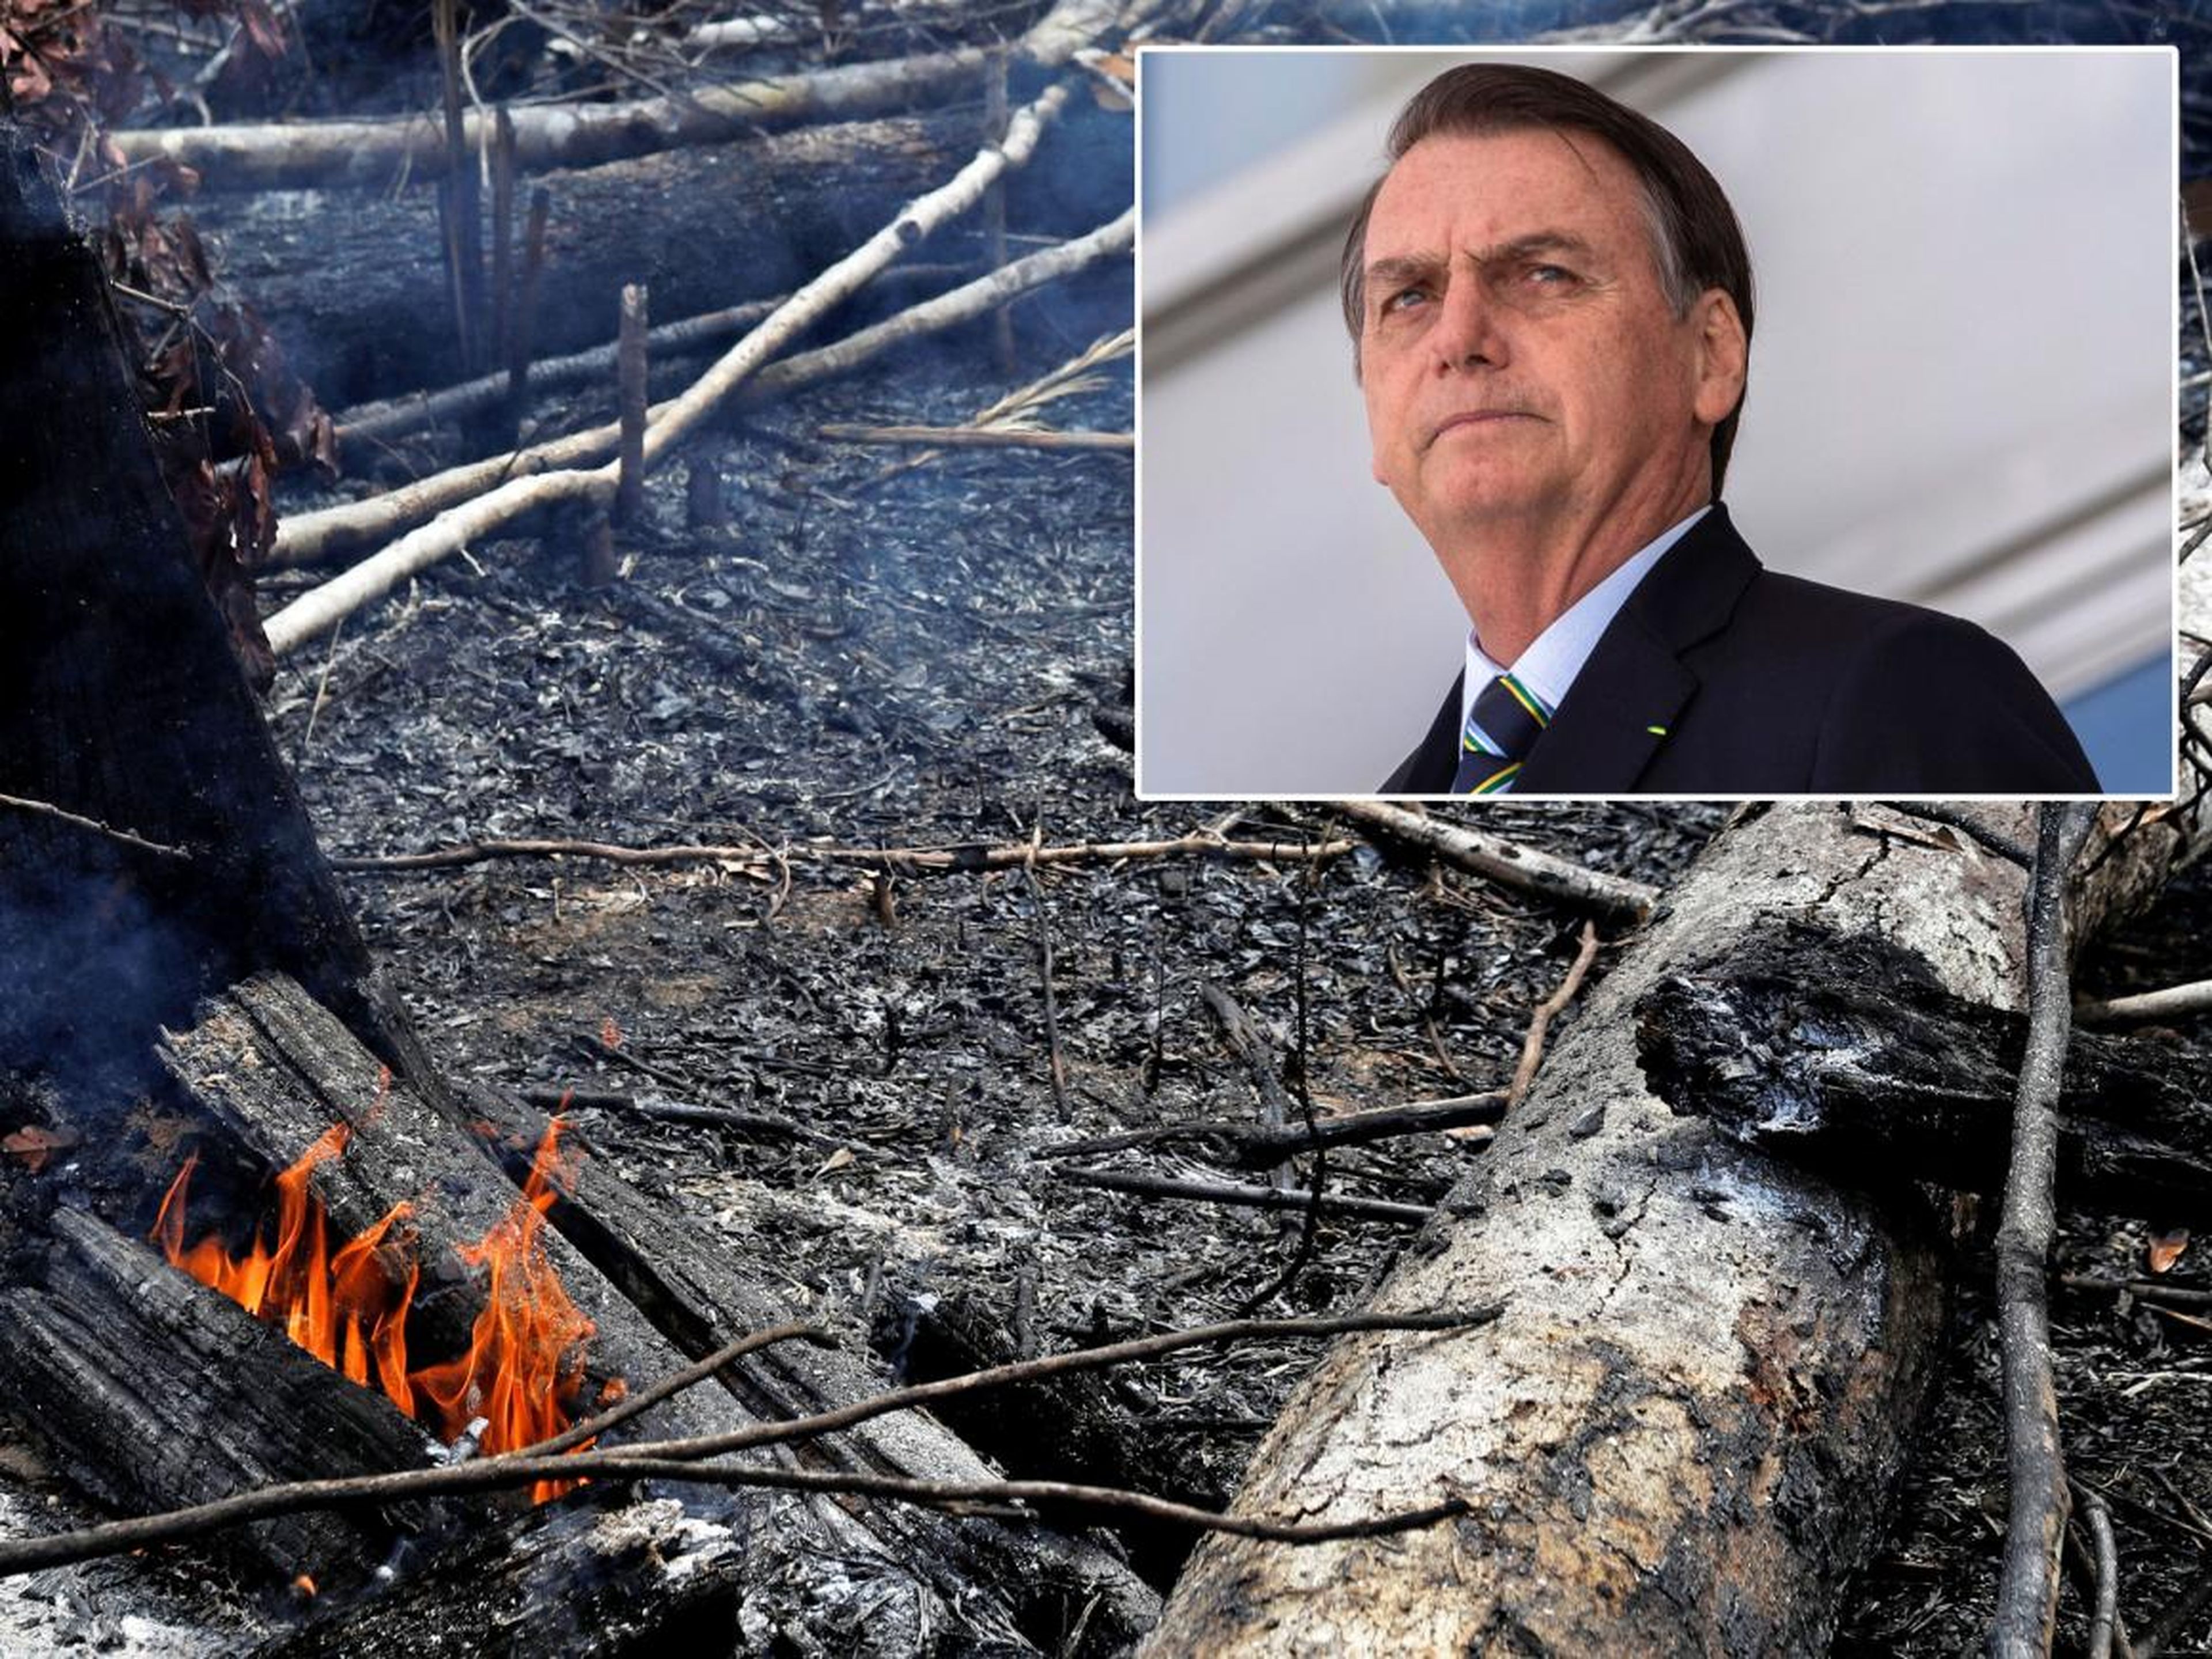 Bolsonaro also suggested — without evidence — that non-governmental organizations are setting the fires to damage his reputation.